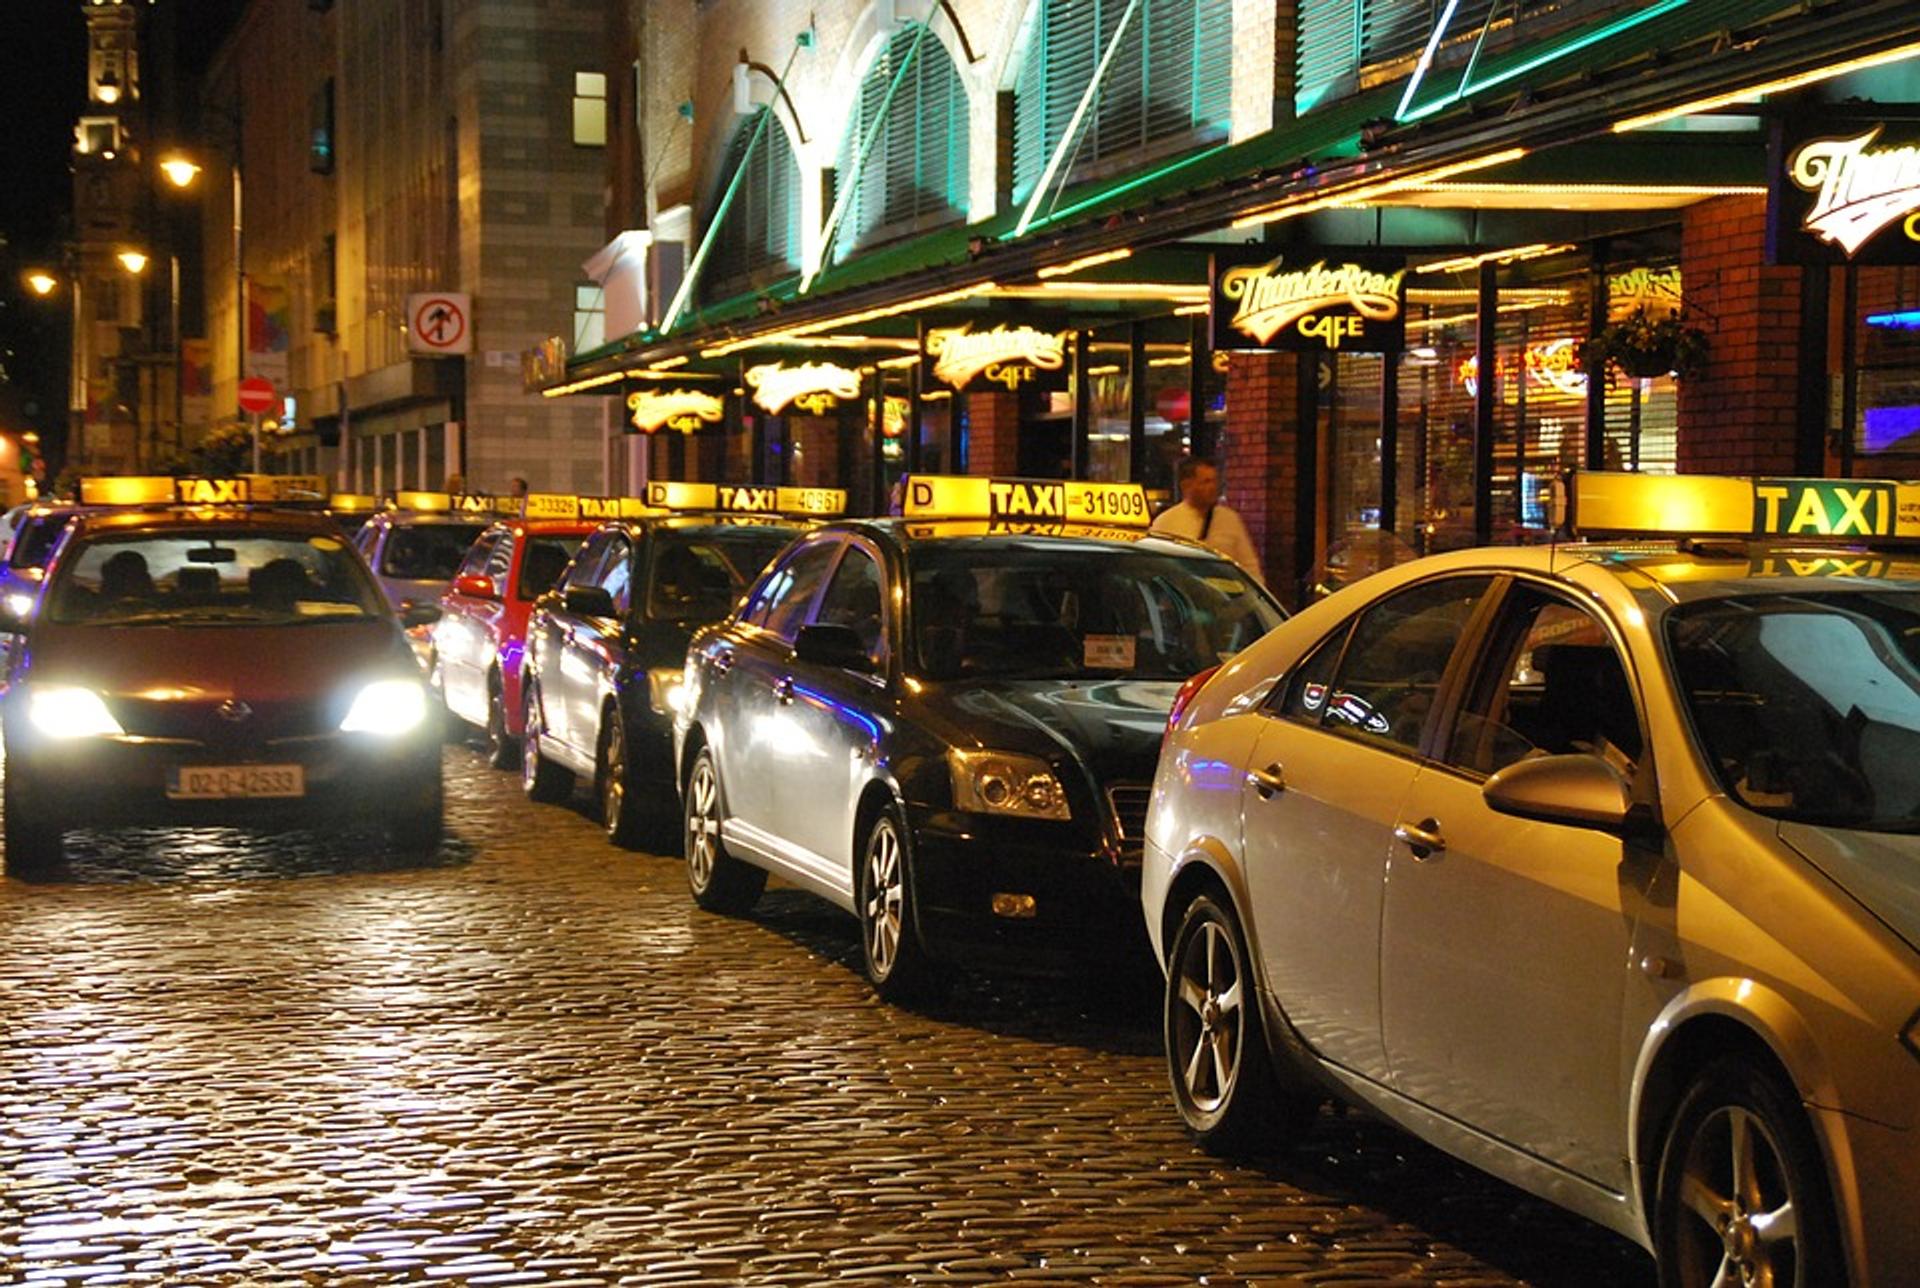 What taxi insurance options does Zego offer in Ireland?